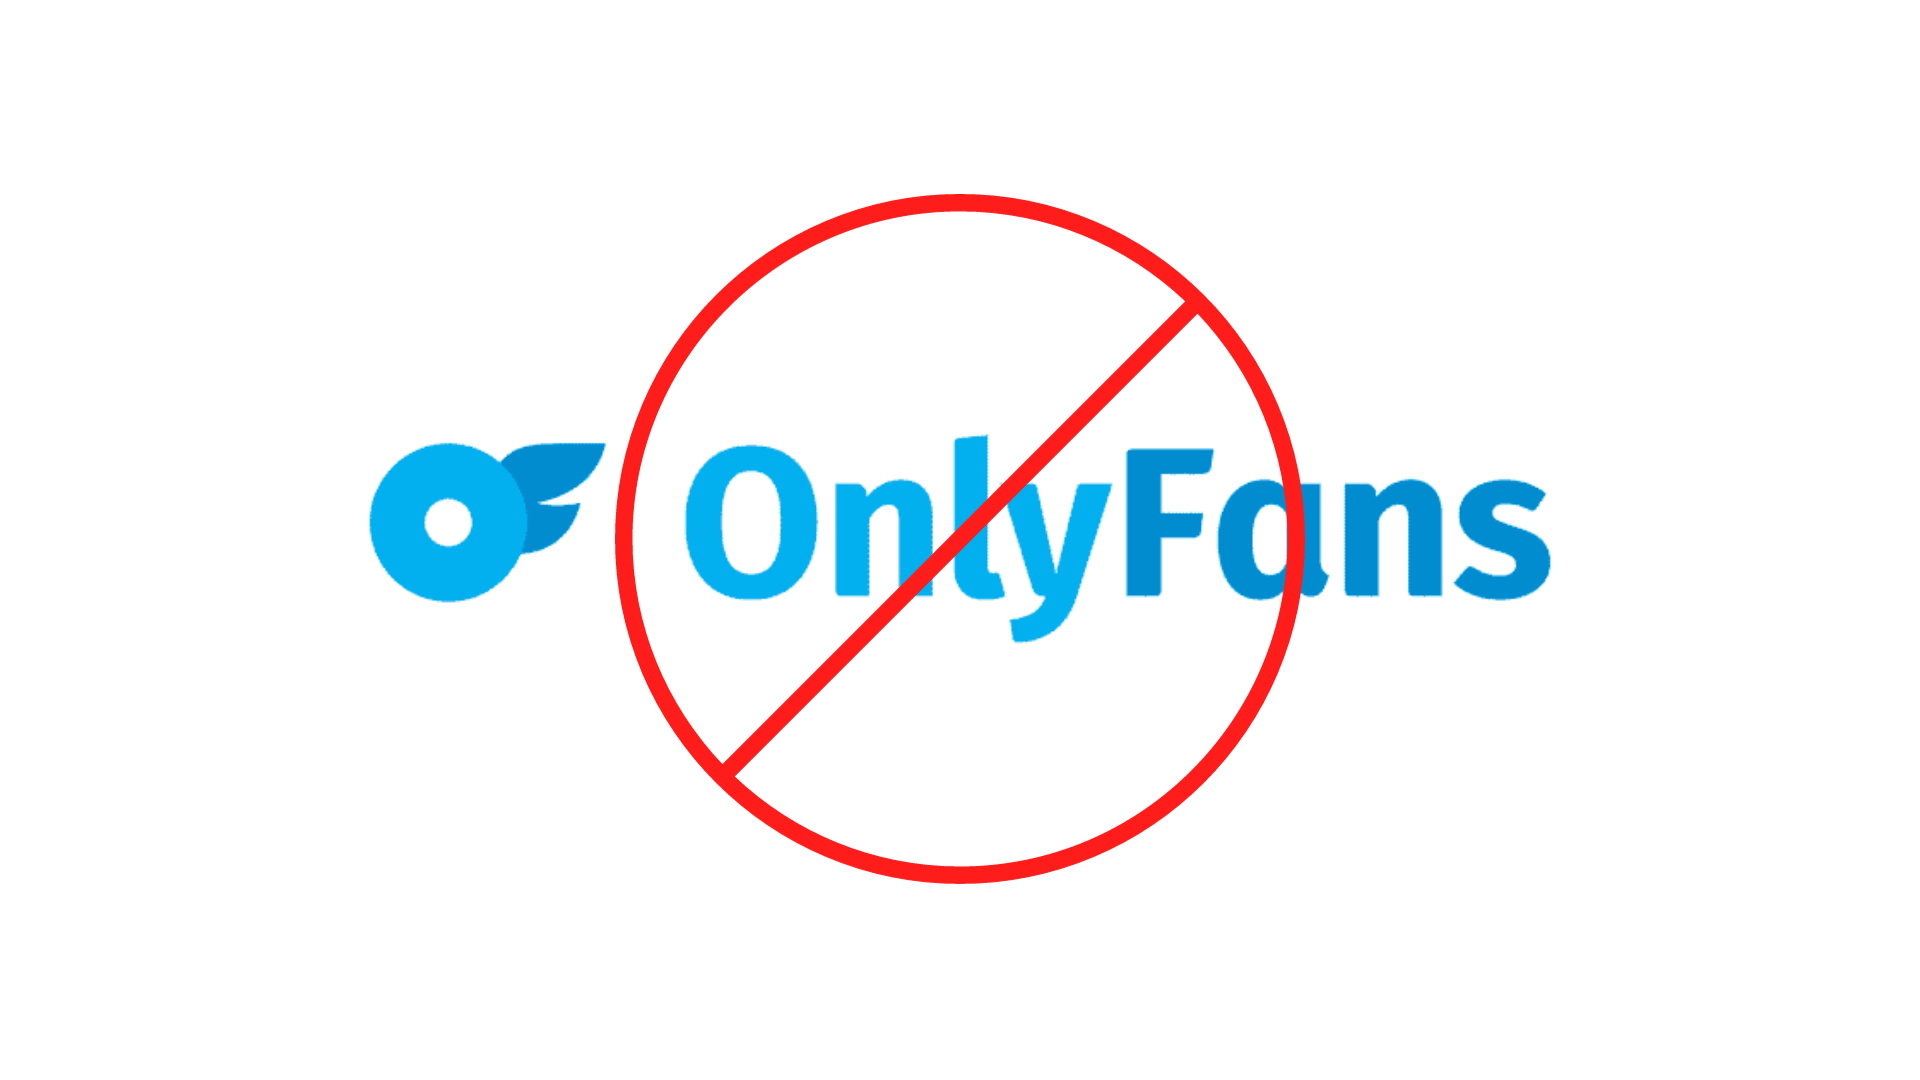 How to Get Around Being Blocked on OnlyFans